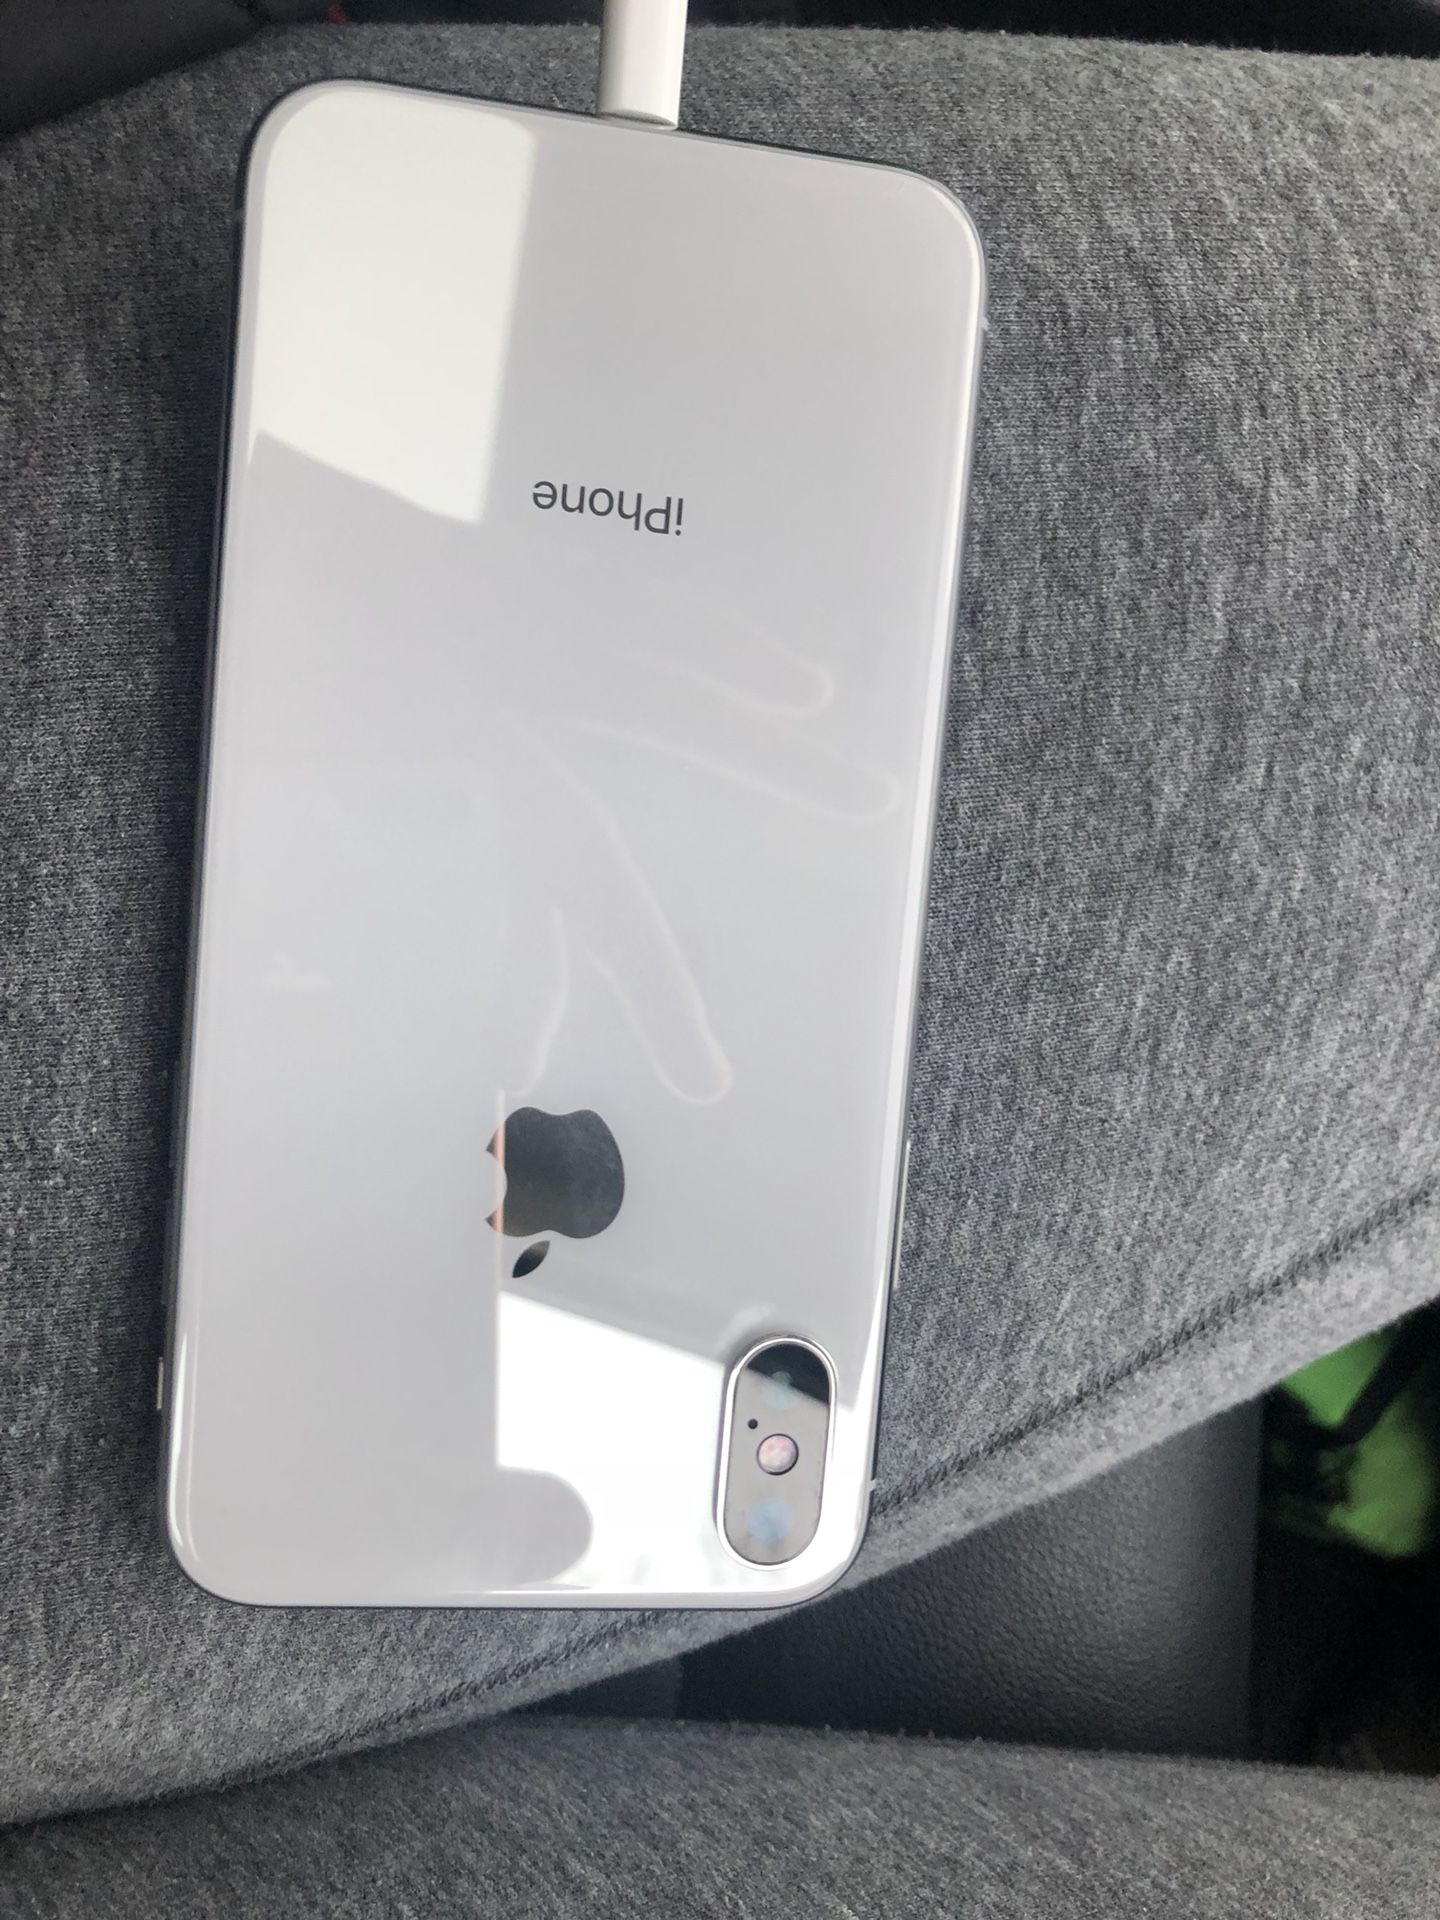 iPhone X 256 gb factory unlocked phone is by T-Mobile brand new condition no box comes with charger $600firm NO LOWER